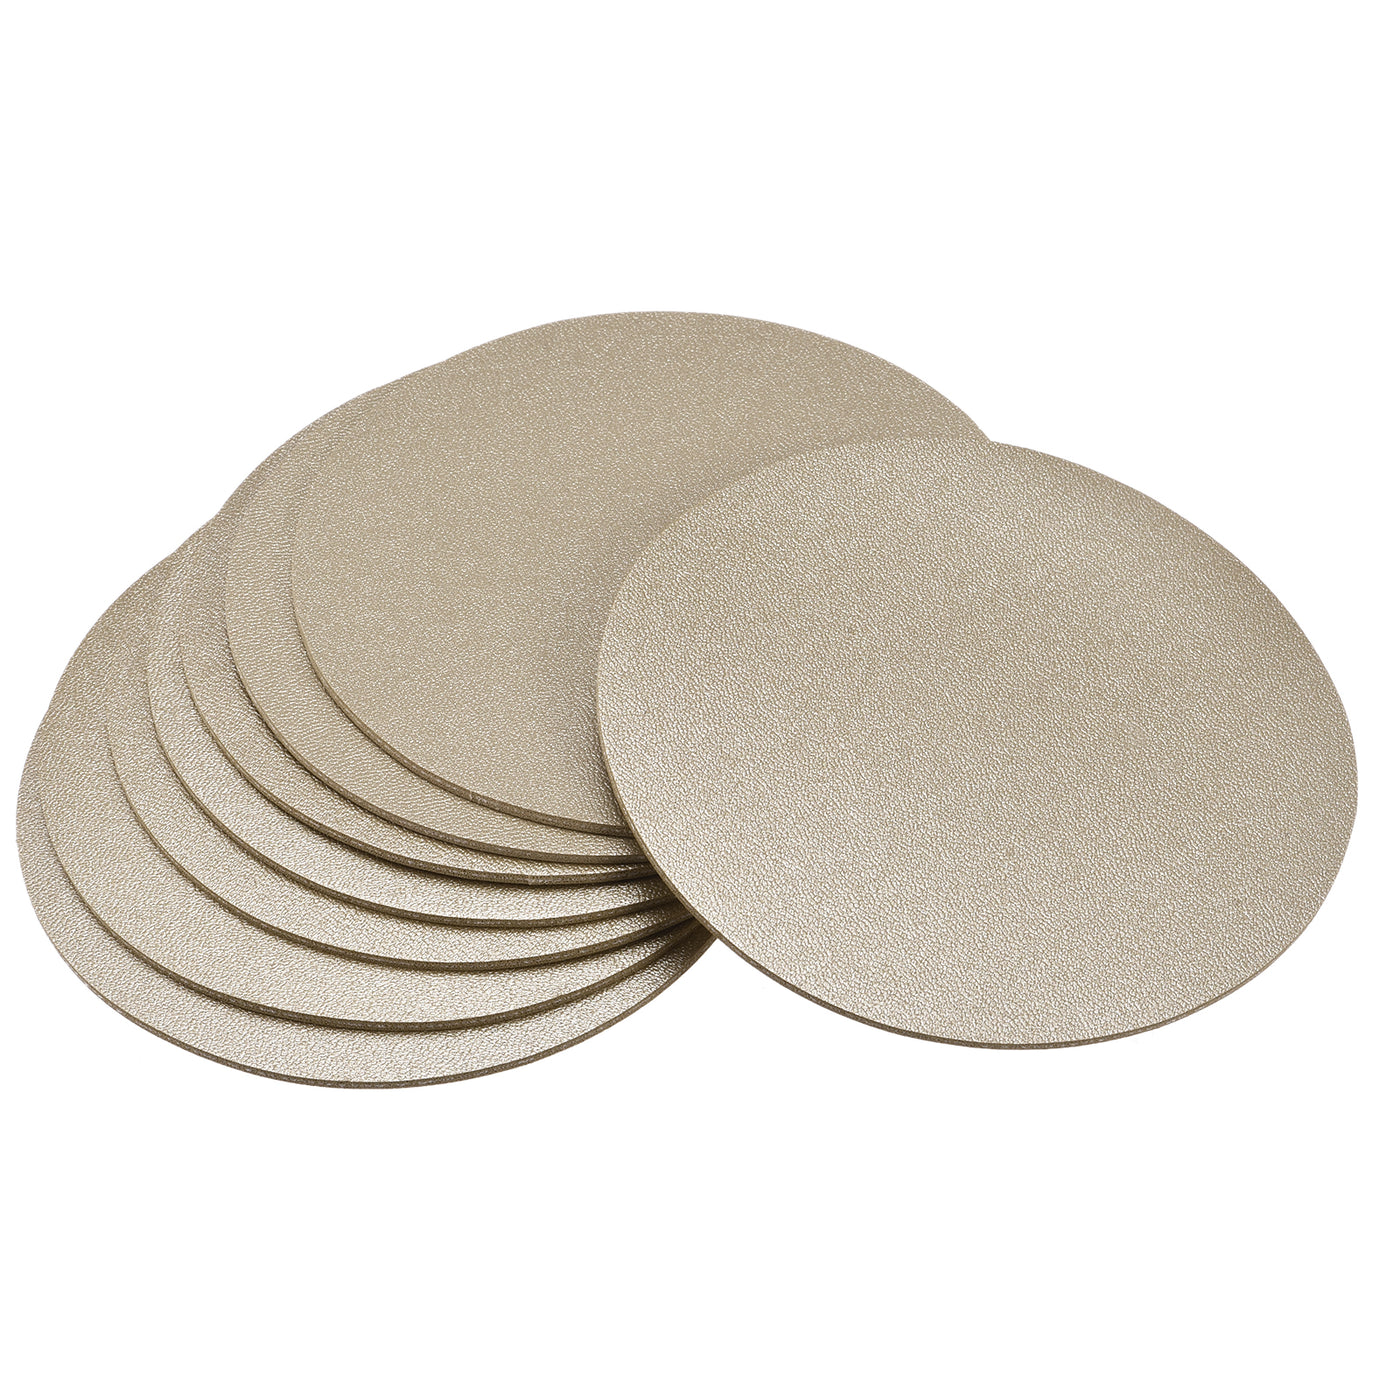 uxcell Uxcell 102mm(4.02") Round Coasters PU Cup Mat Pad for Tableware Gold Tone 8pcs